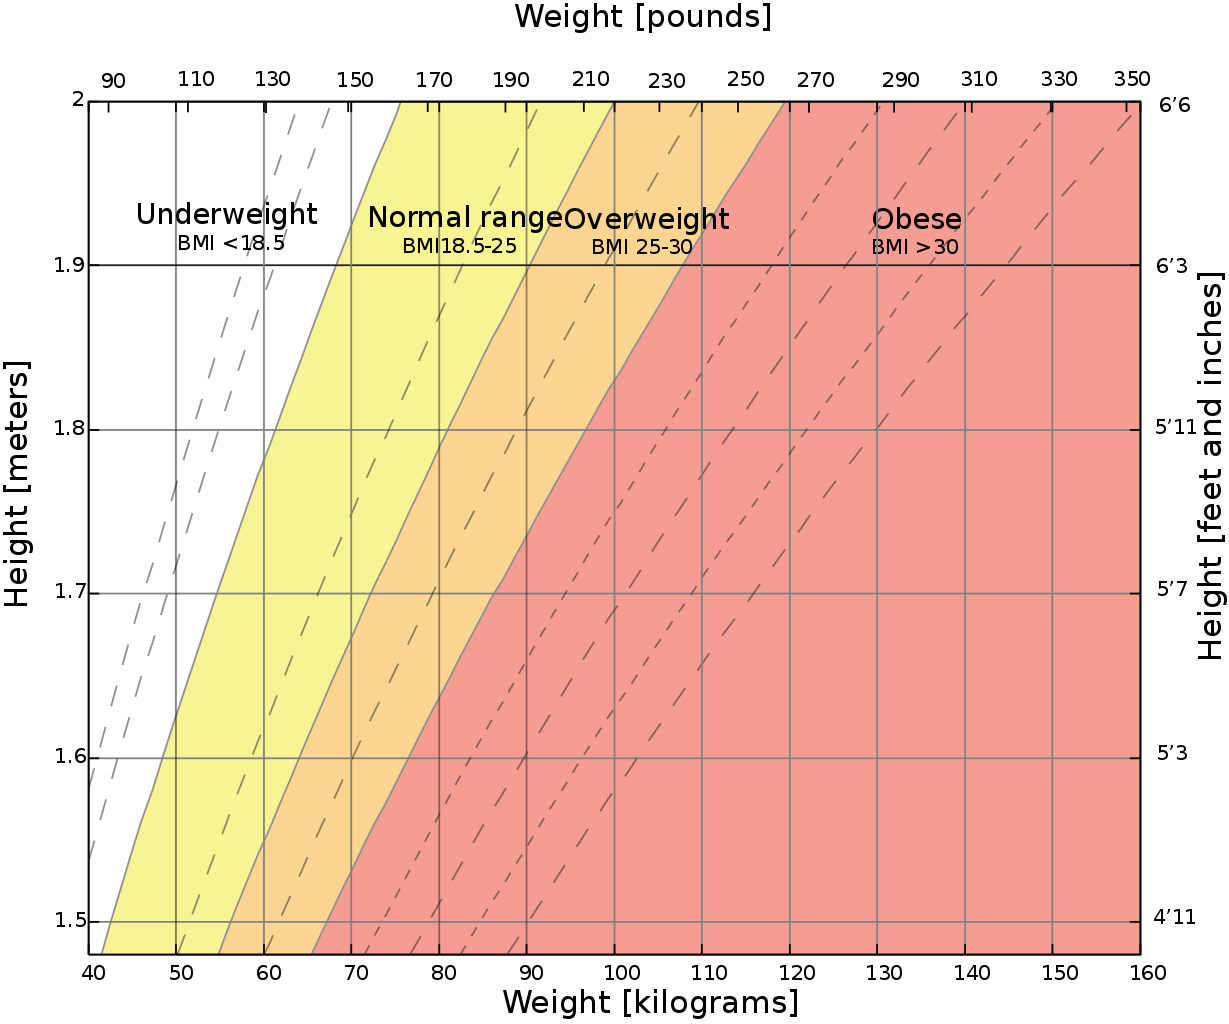 Graph of weight and height. Areas of the graph are shaded in different colors indicating body mass index categories.